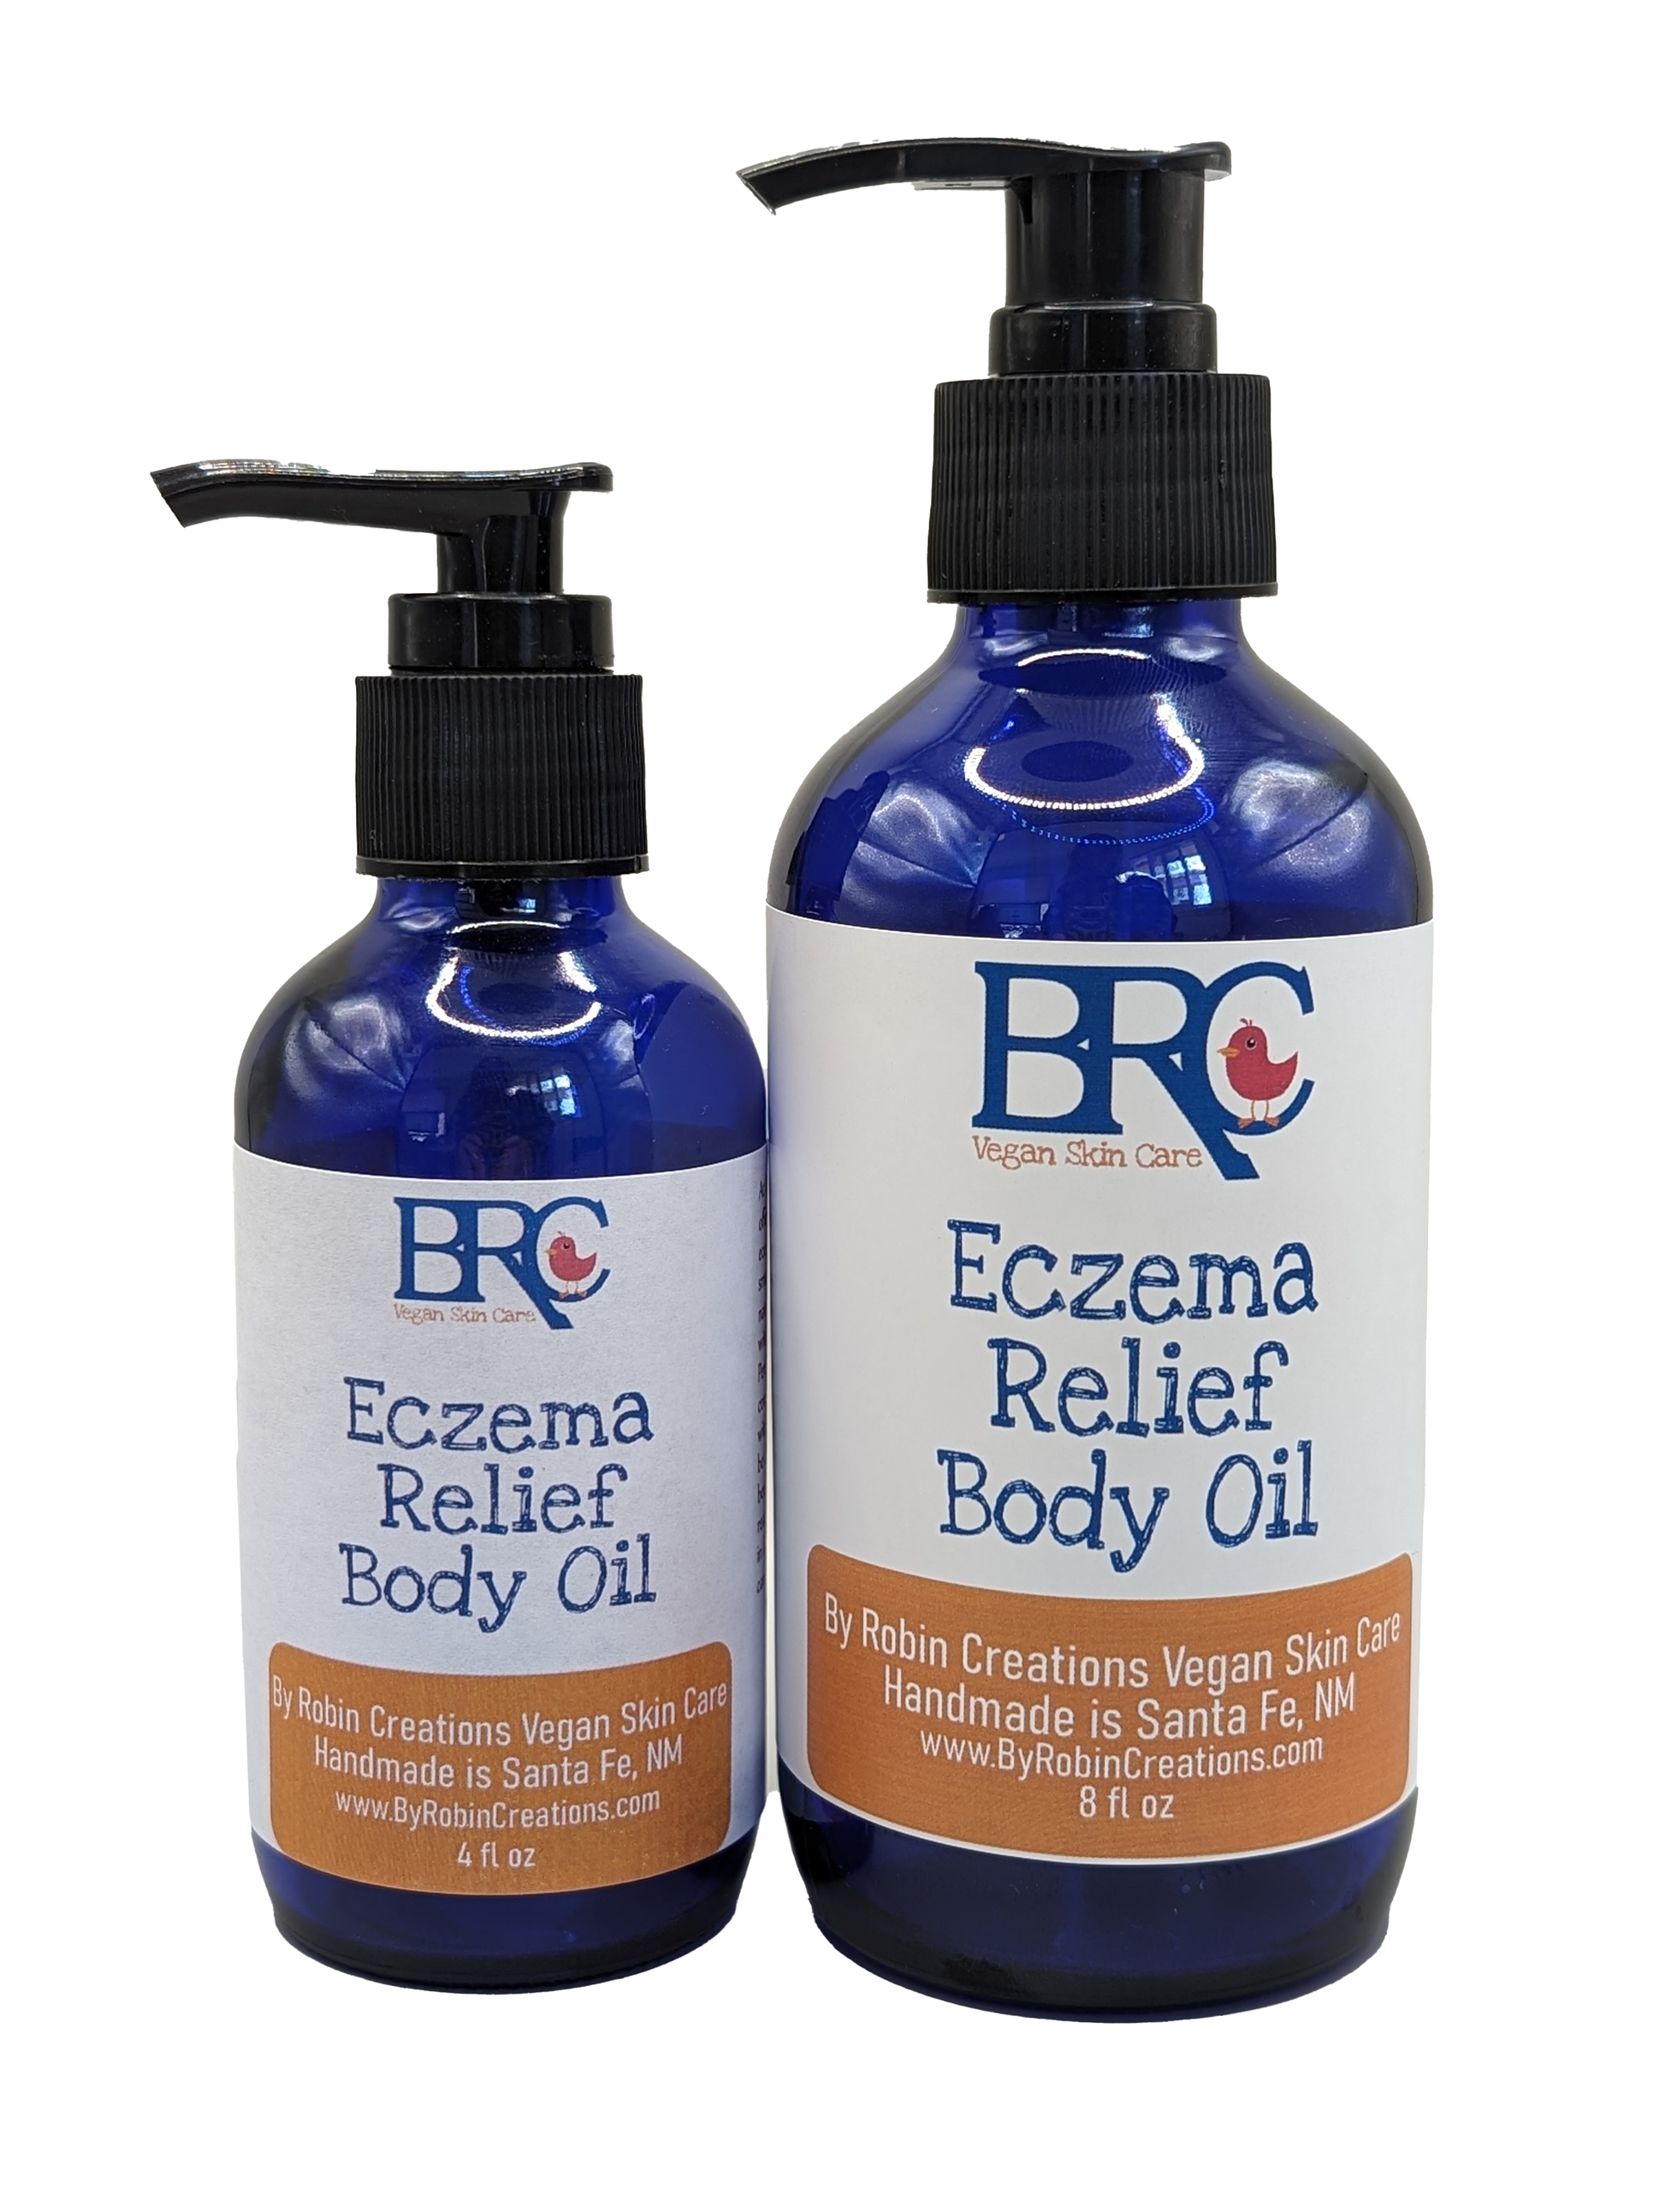 Eczema Relief Body Oil | By Robin Creations 